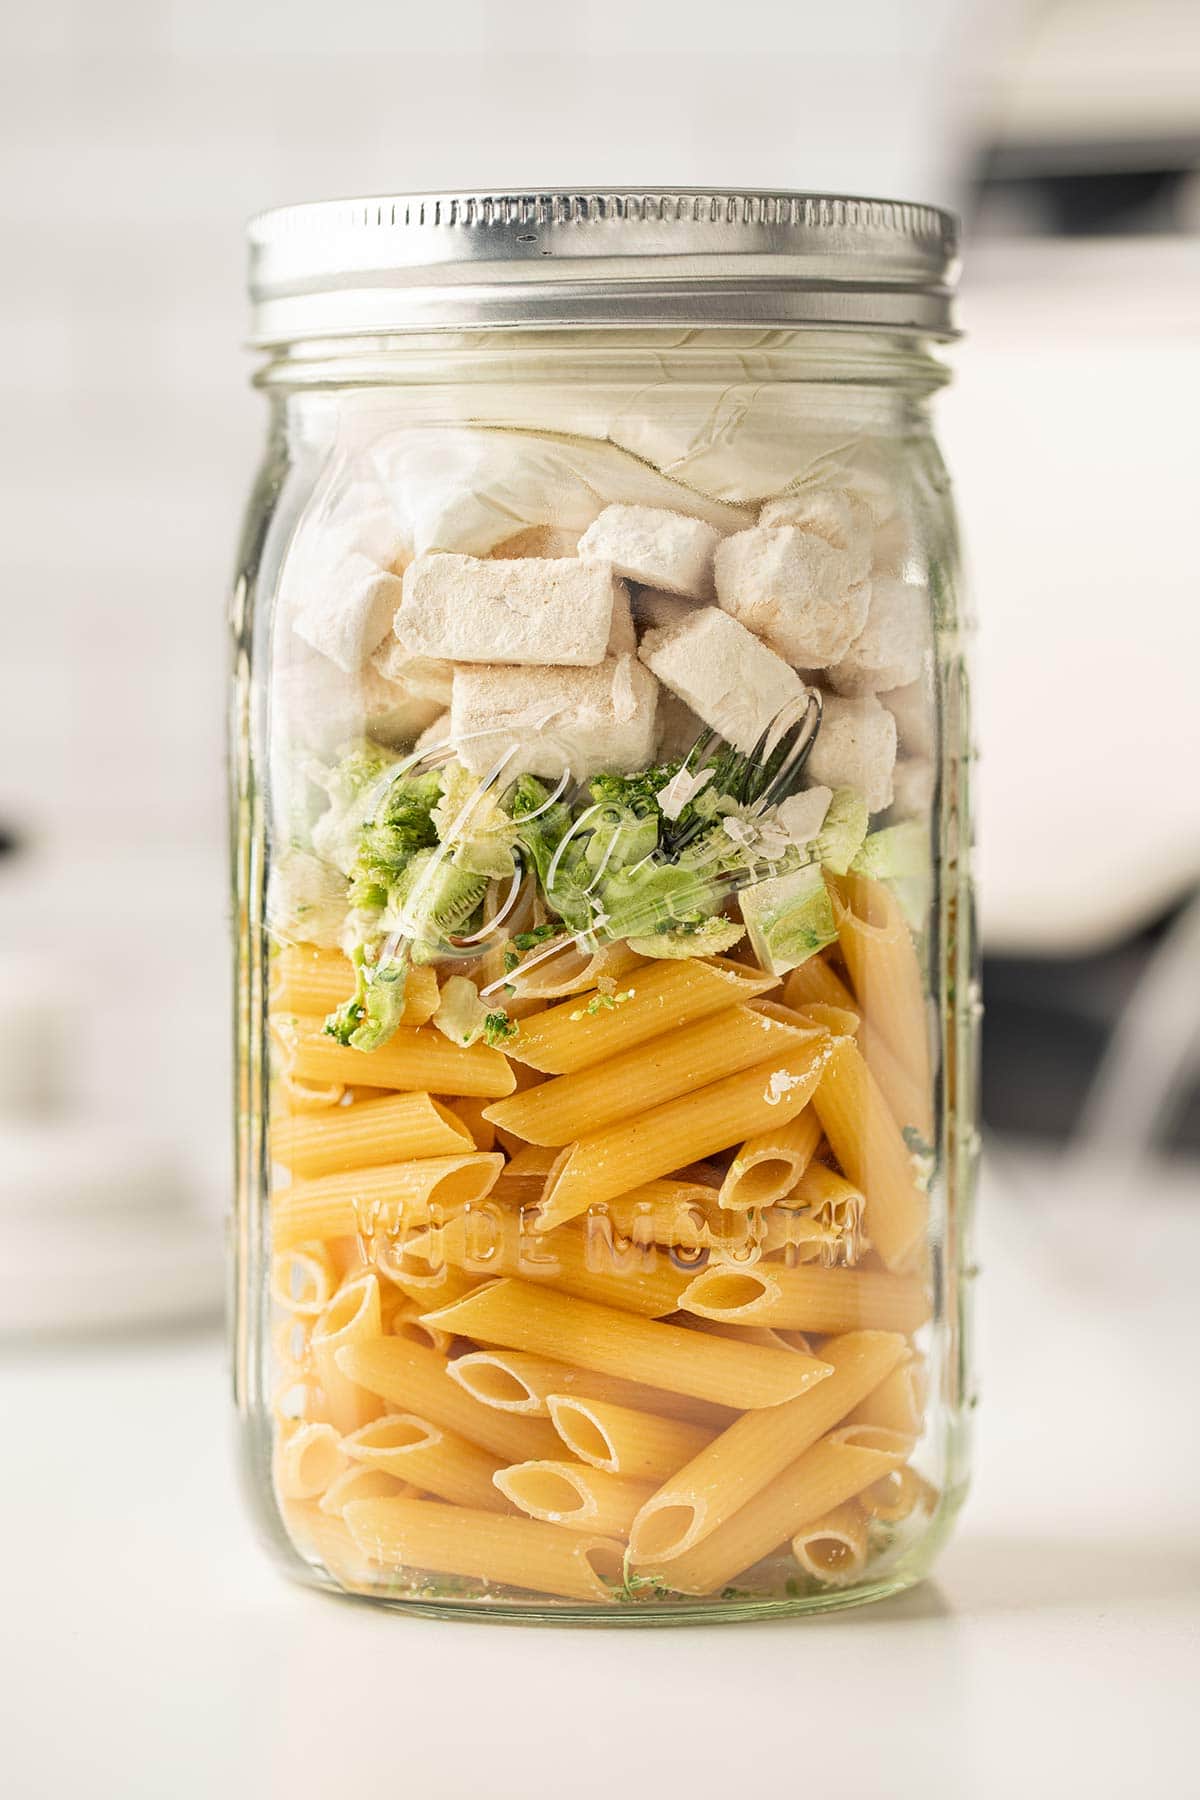 Chicken Broccoli Alfredo Meal in a Jar, sealed and sitting on white countertop.